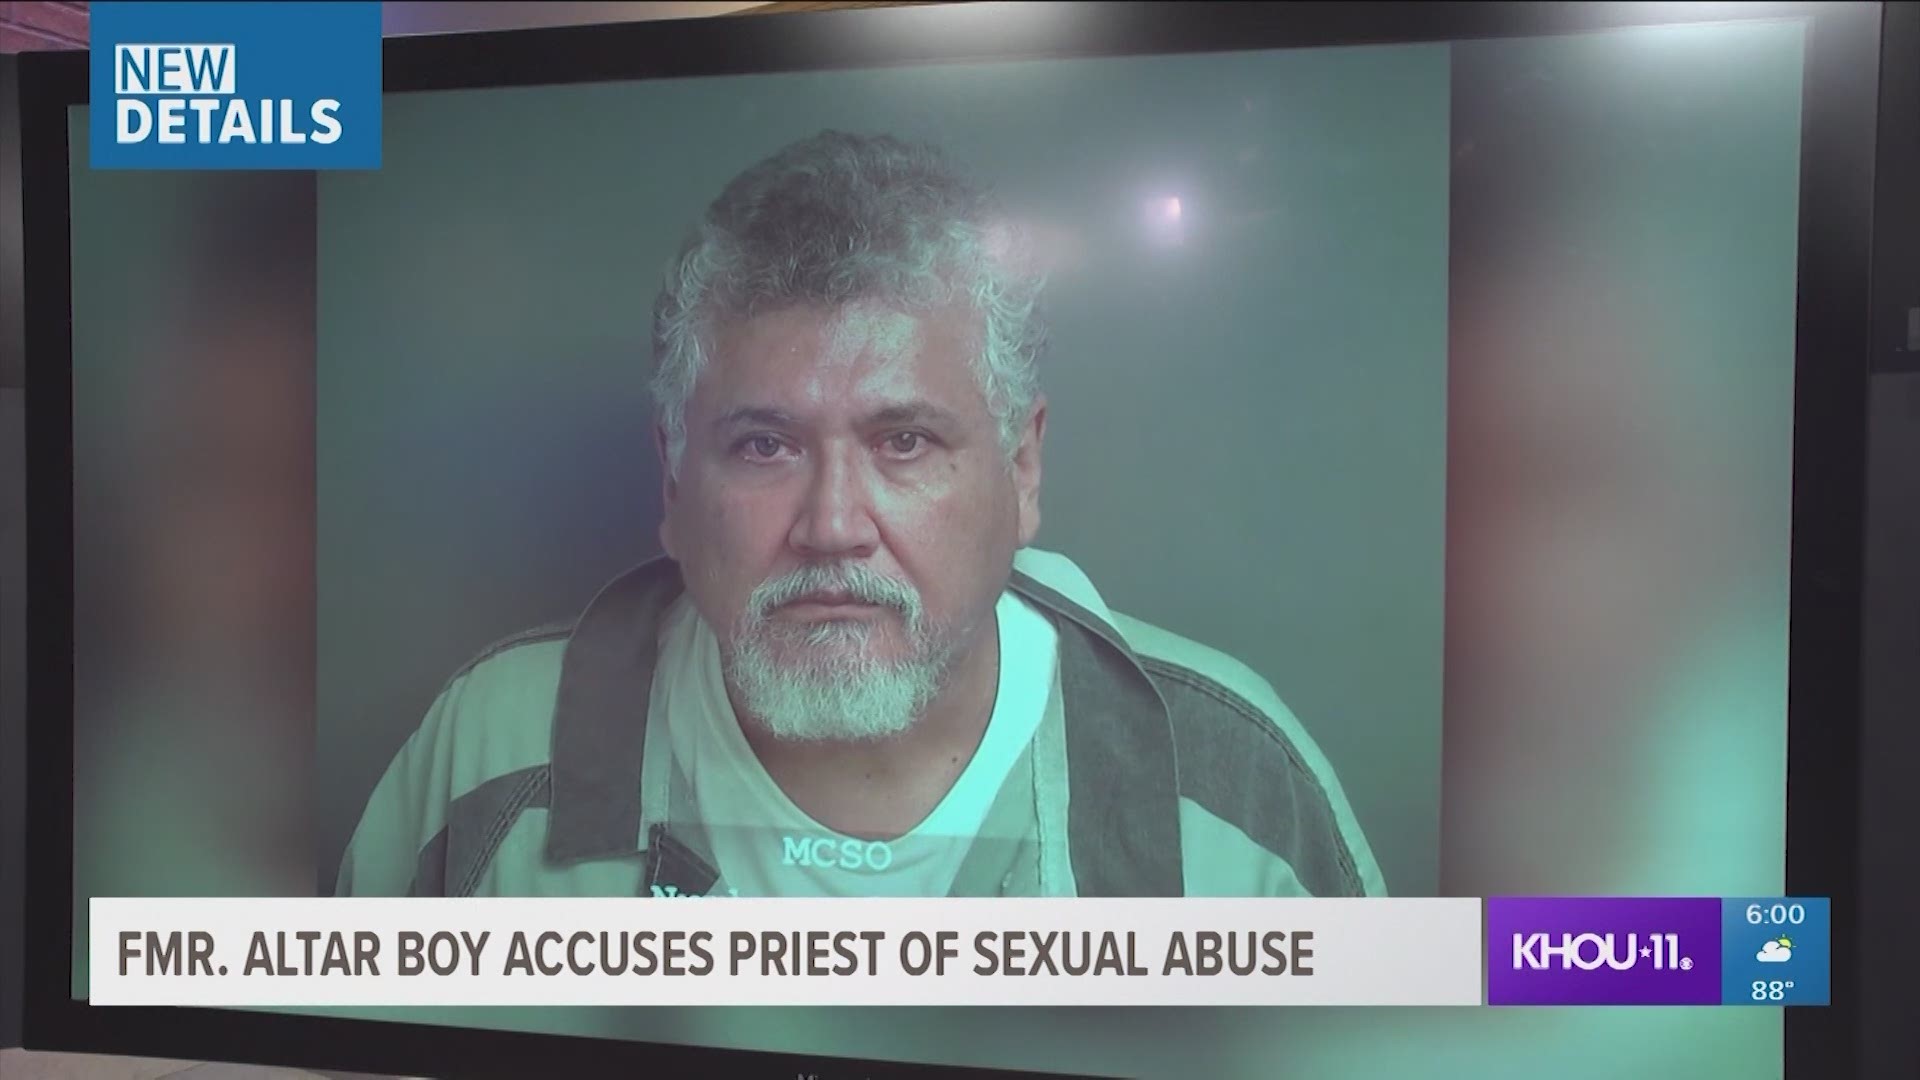 There is now a third accuser alleging Manuel LaRosa-Lopez sexually abused him, even before LaRosa-Lopez was ordained.